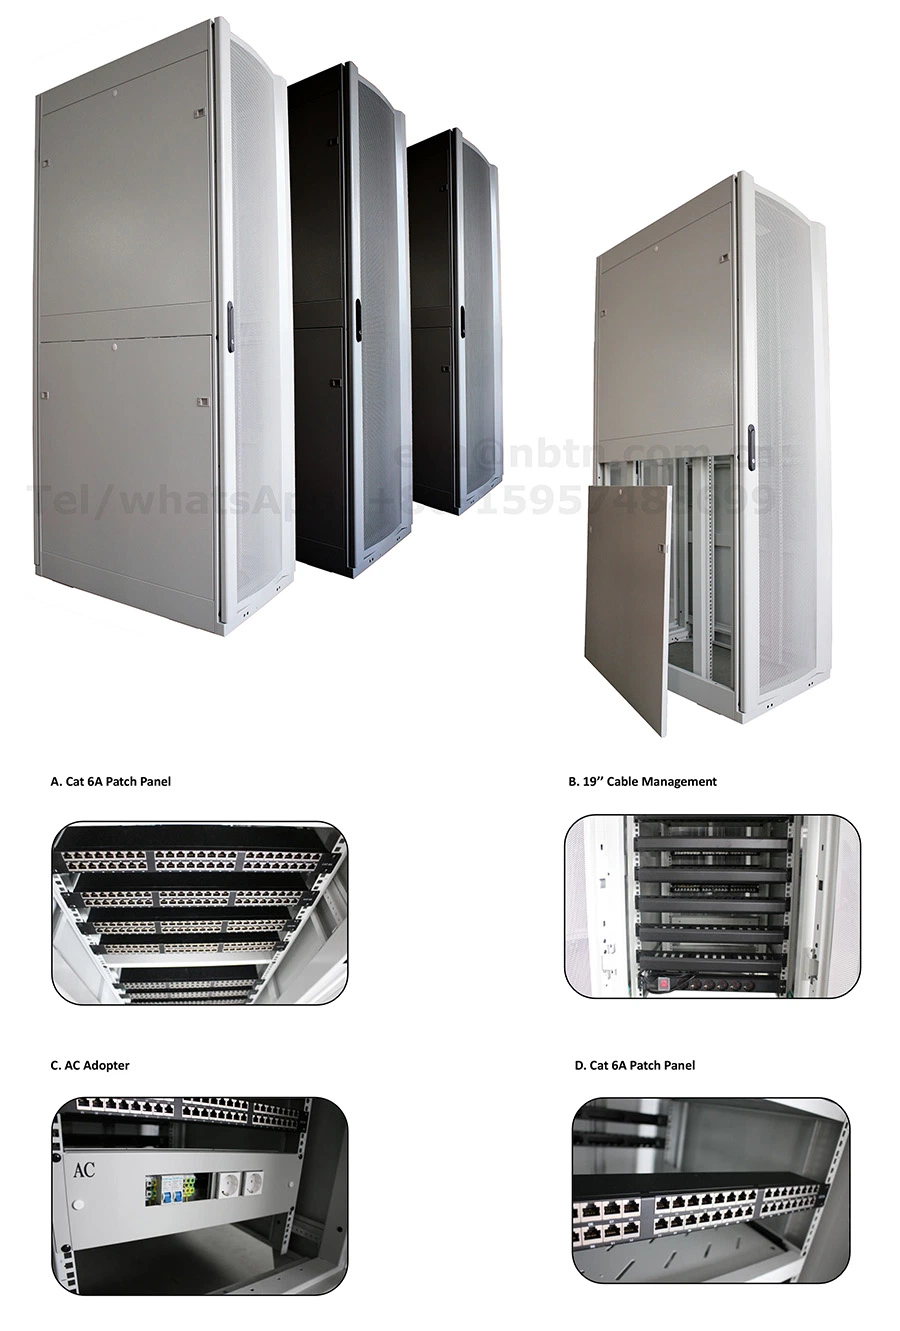 Heavy Duty Server Rack for Cat 6A Patch Panel